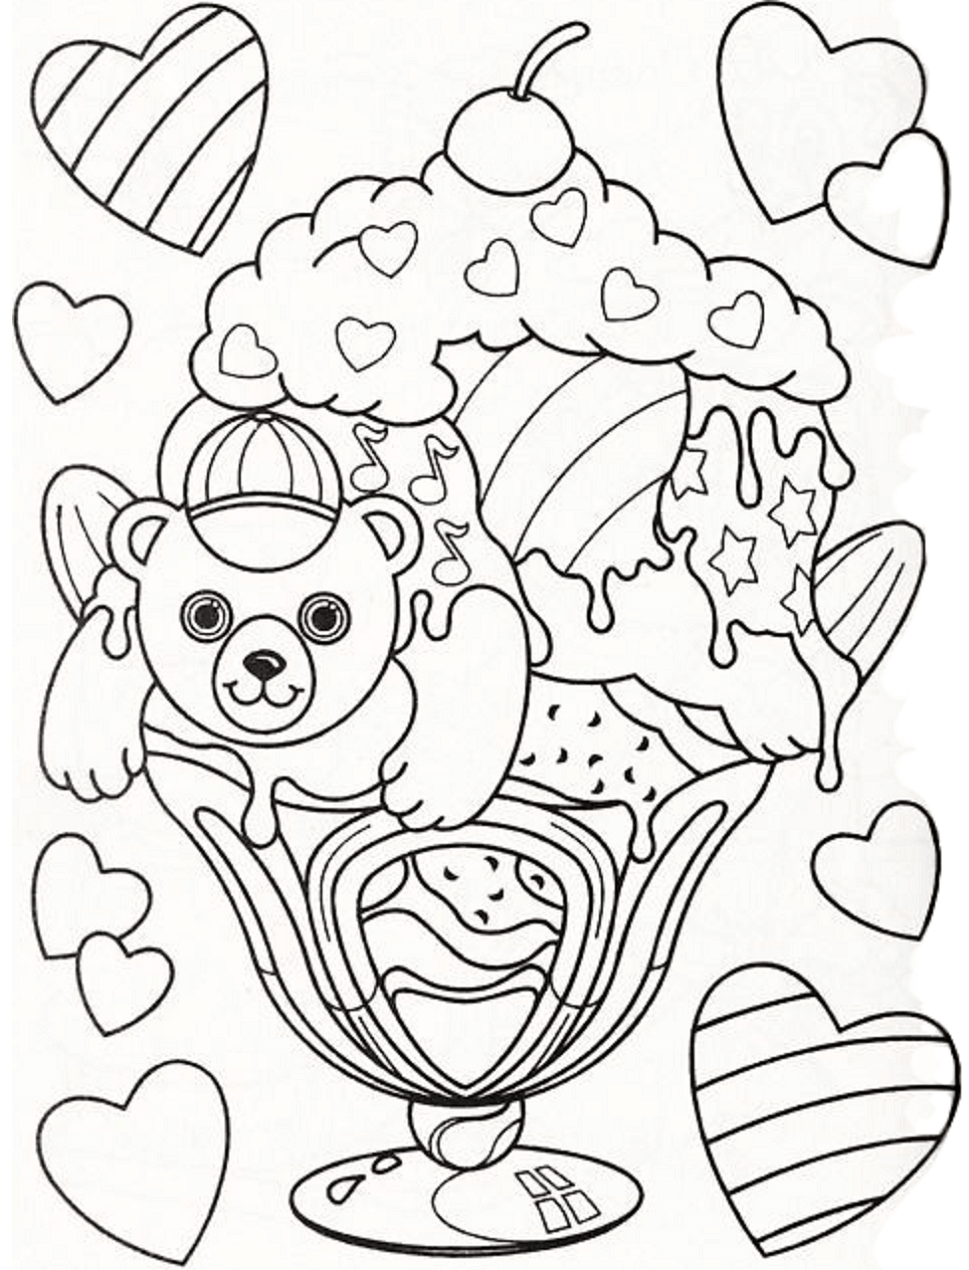 Printable Lisa Frank Coloring Pages - Get Your Hands on Amazing Free ...